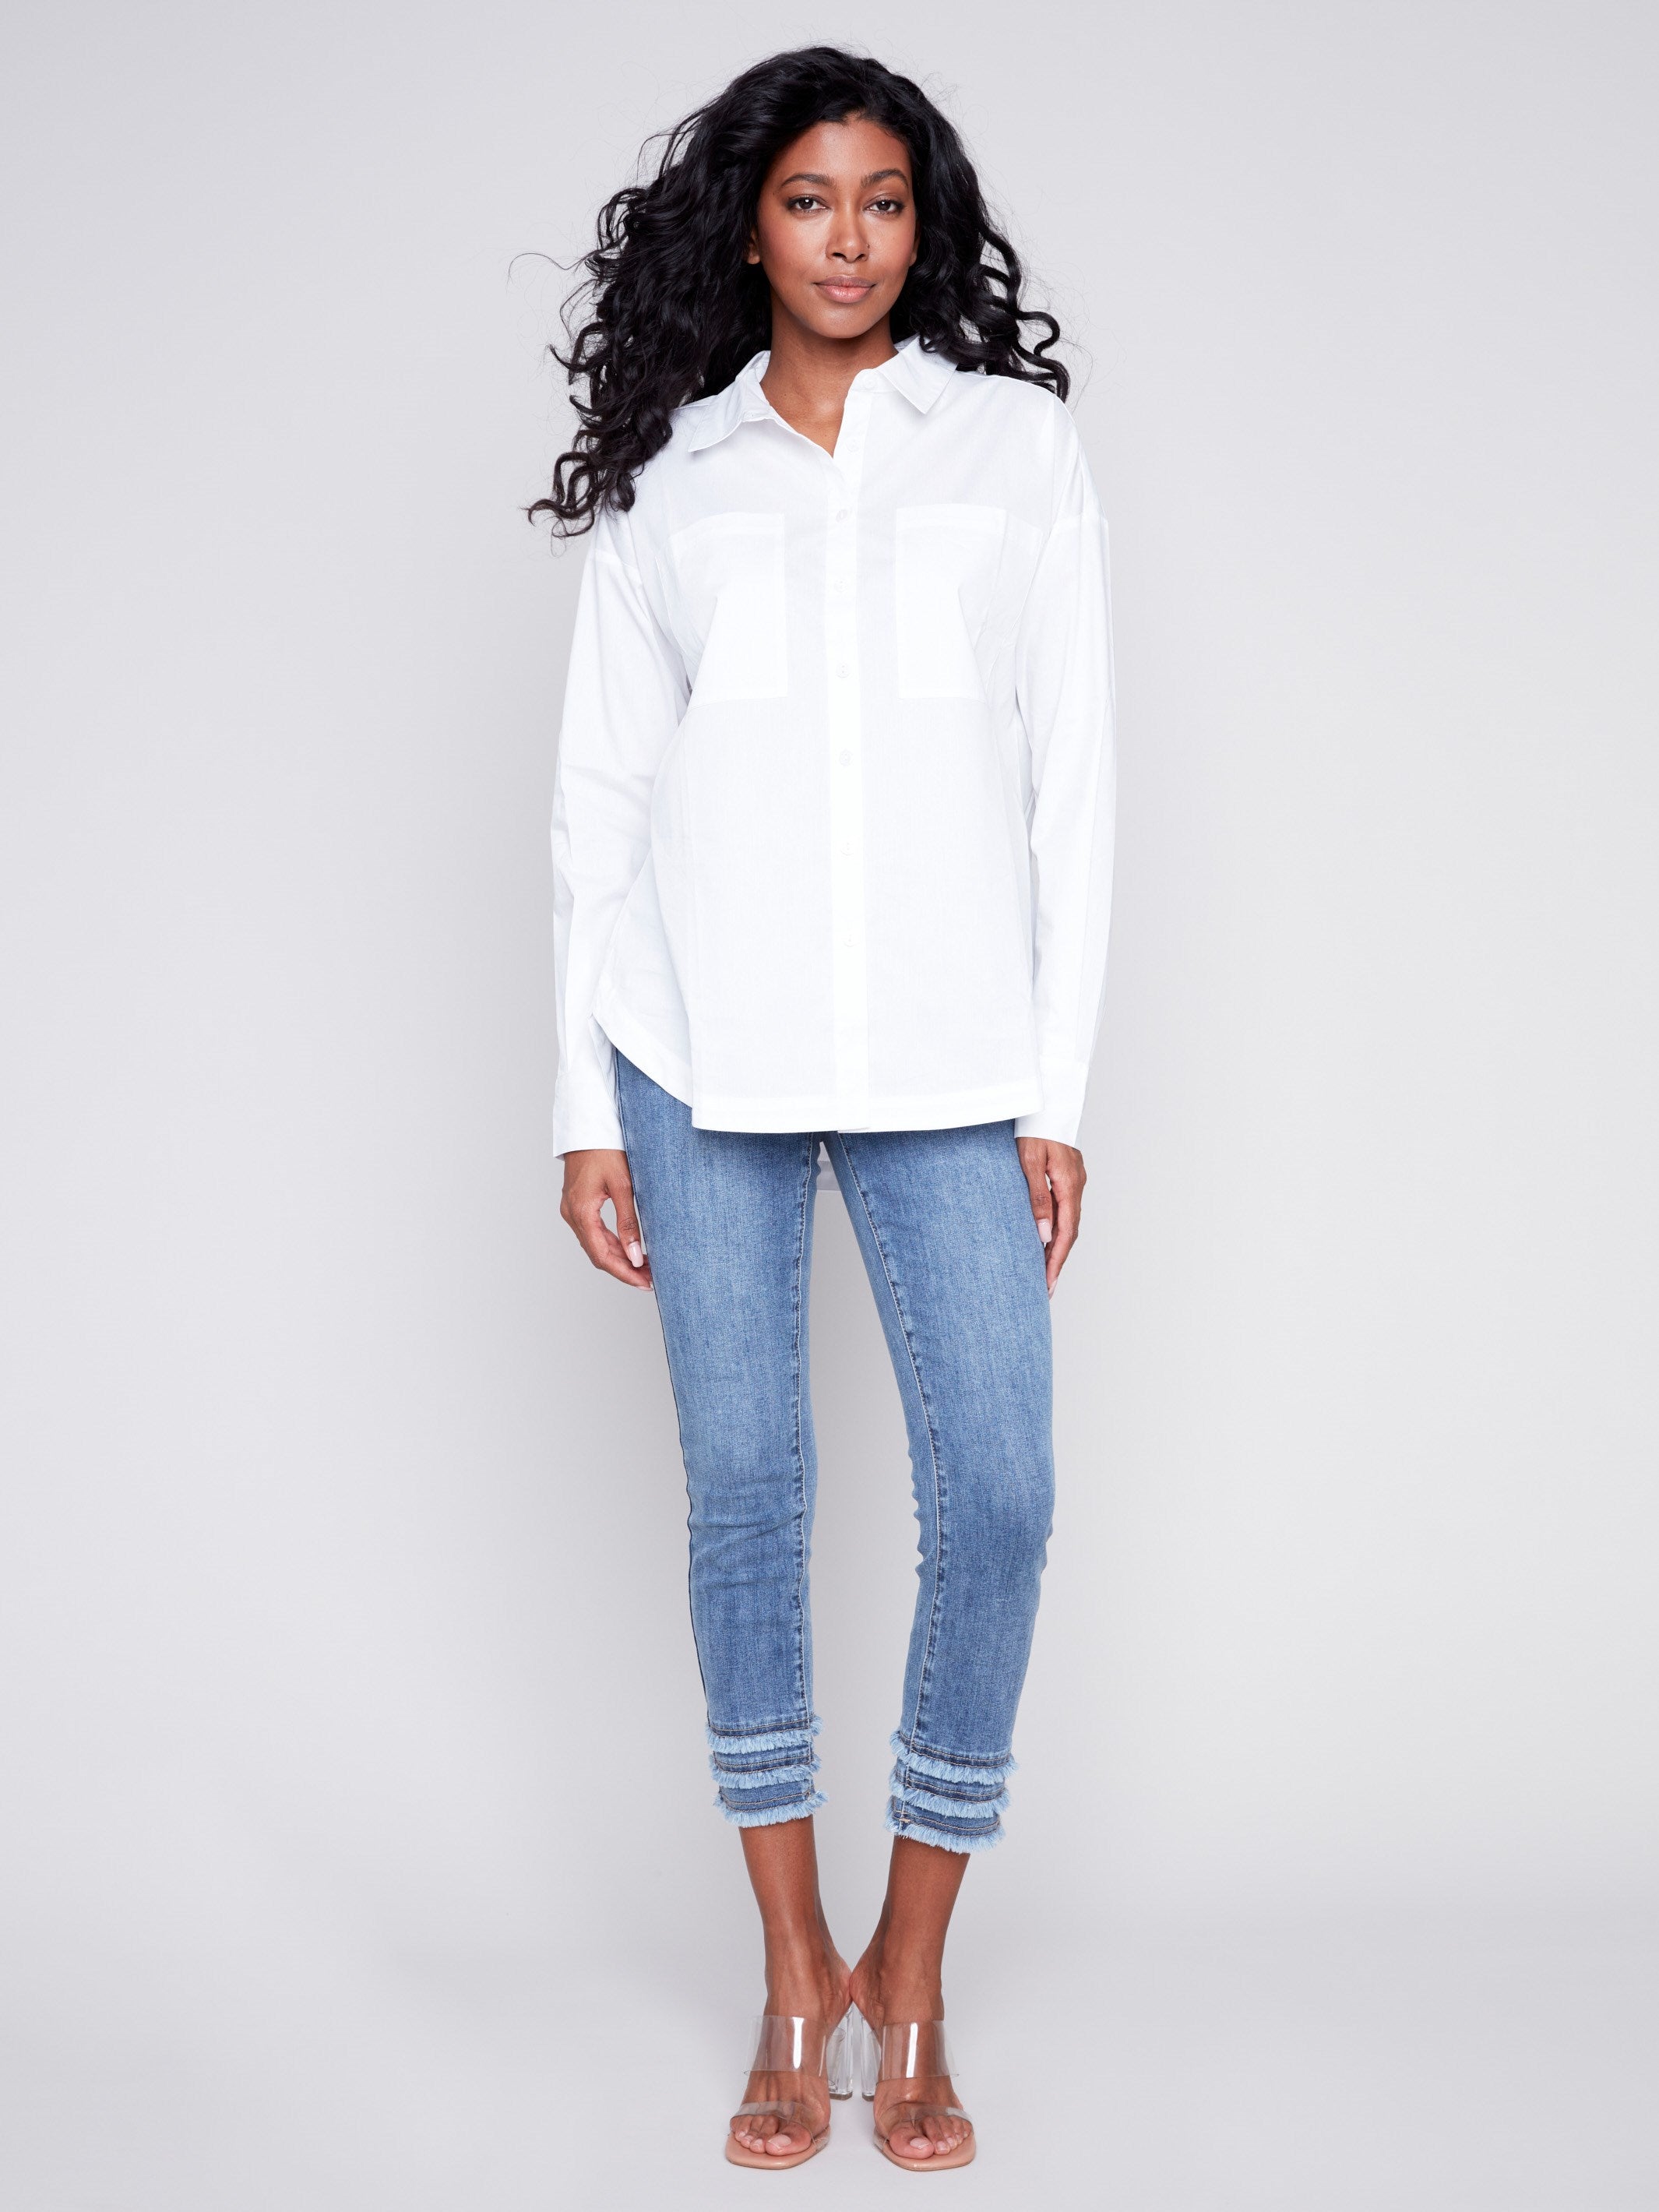 Loose Poplin Shirt - White - Charlie B Collection Canada - Image 5